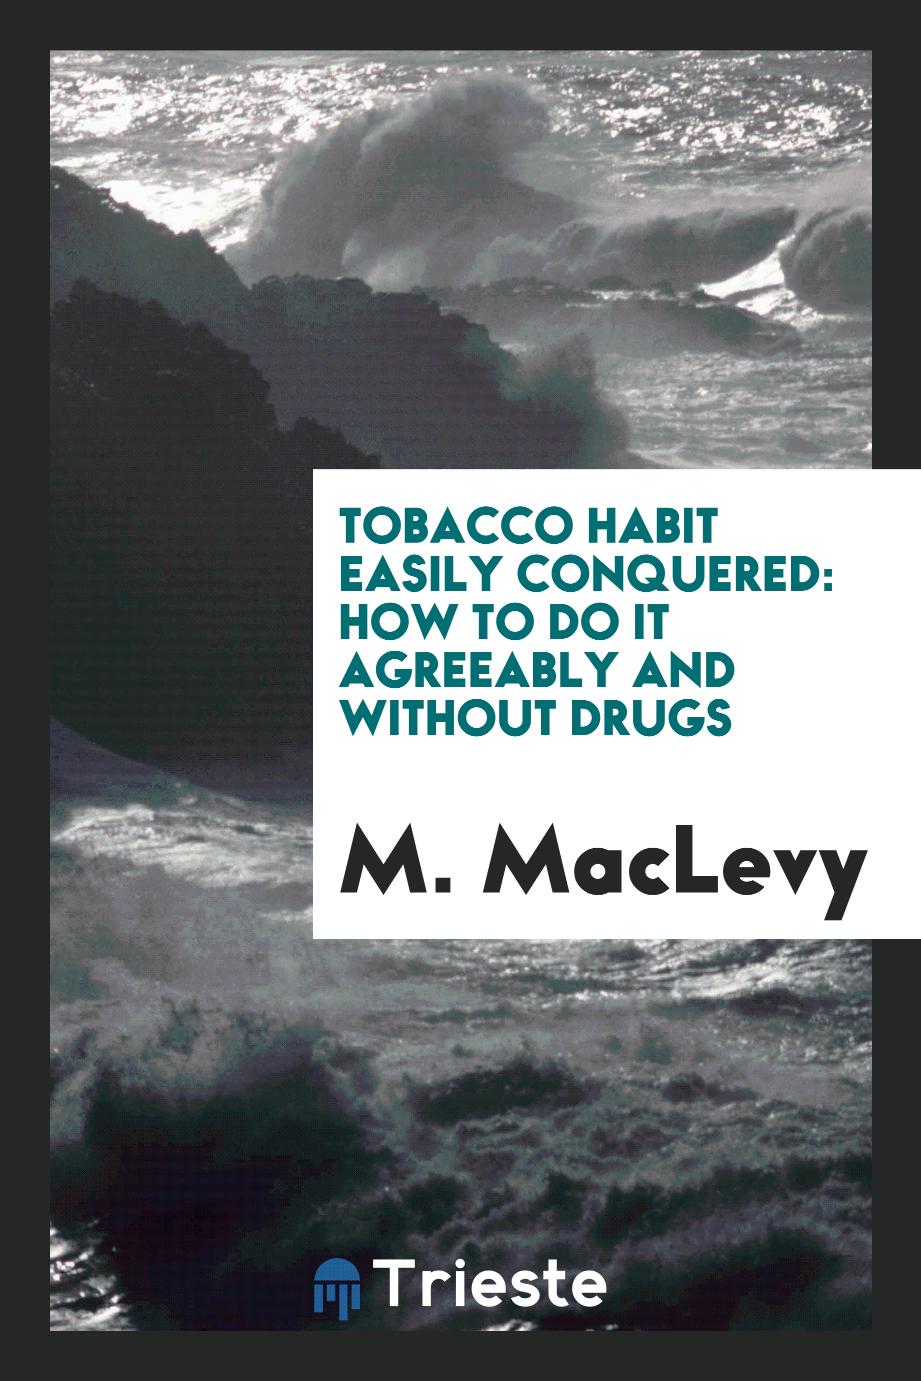 Tobacco Habit Easily Conquered: How to Do it Agreeably and Without Drugs